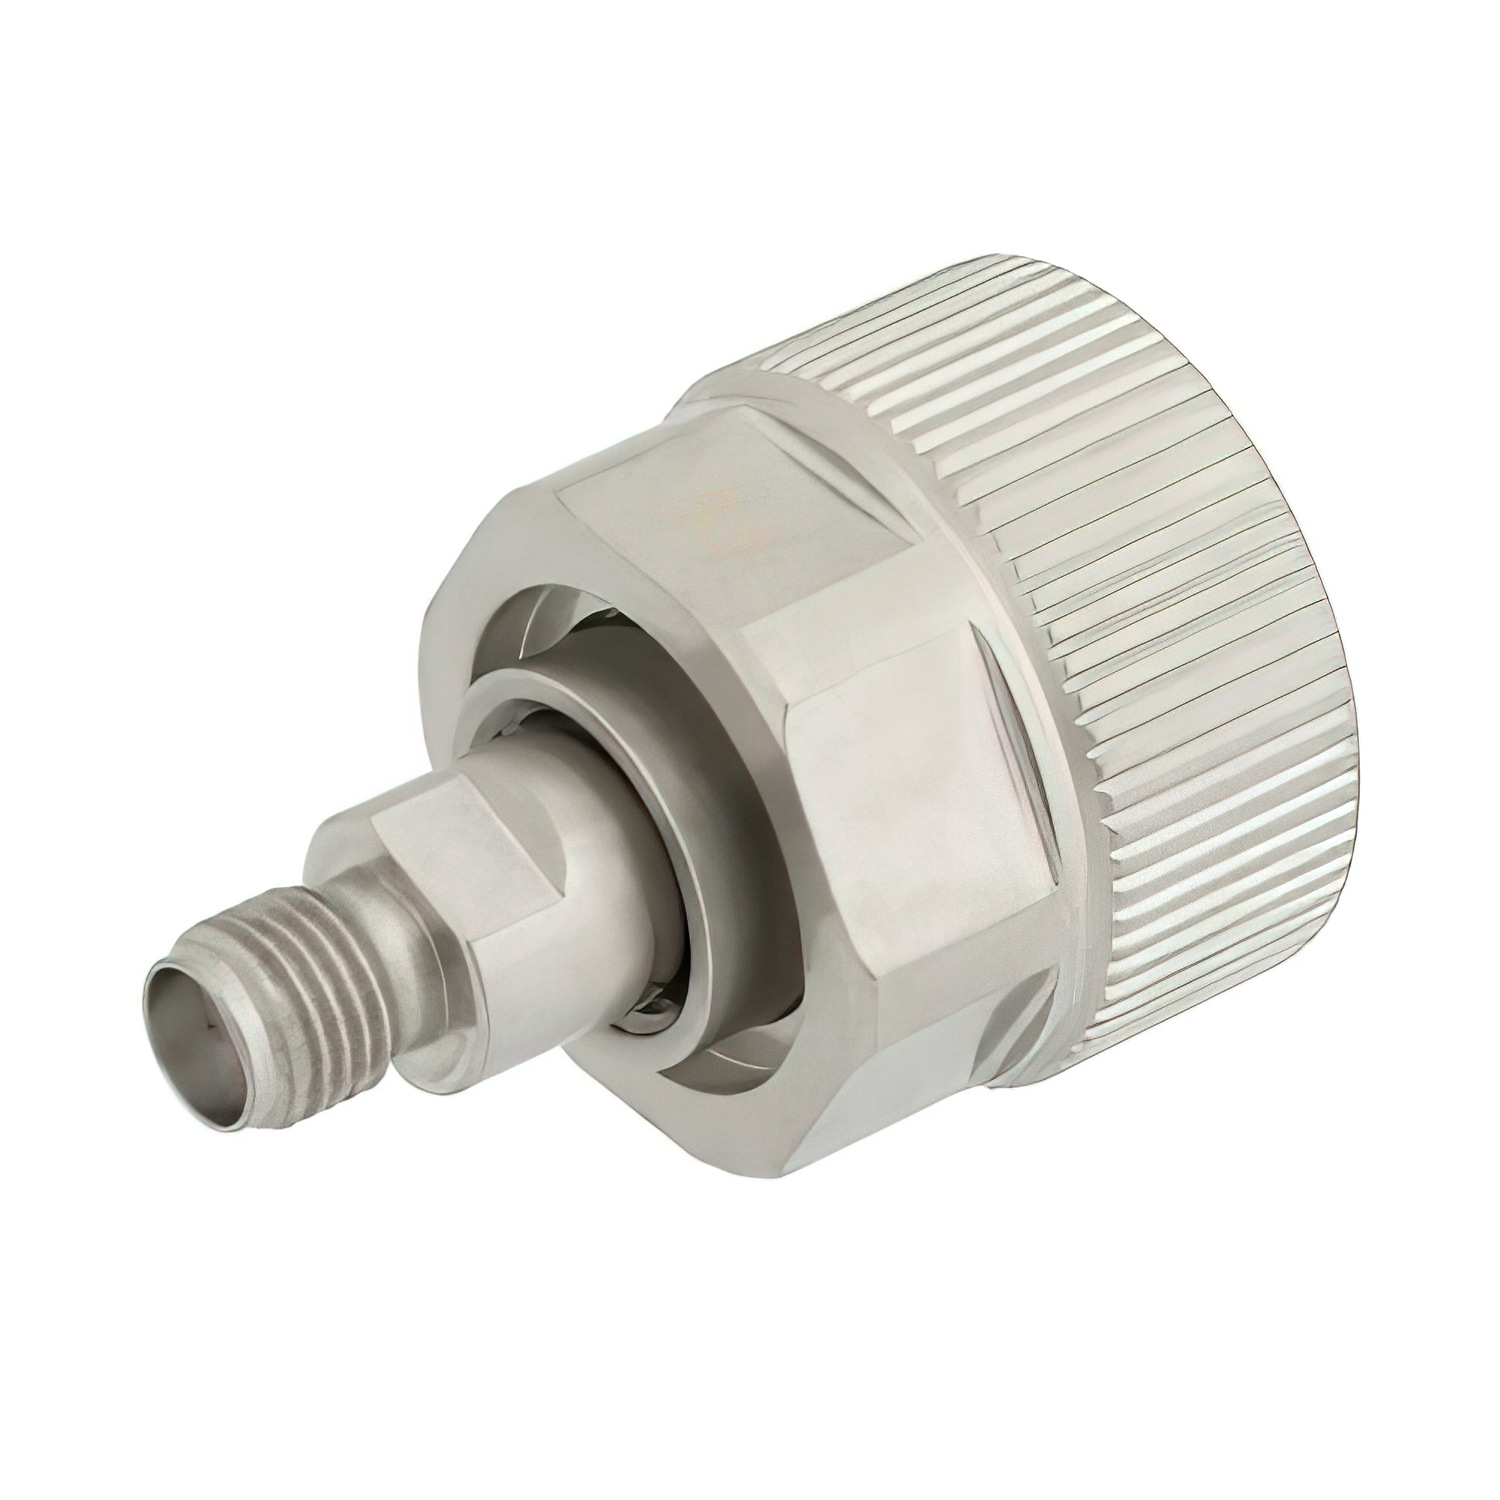 3.5mm NMD Female to SMA Female Adapter1